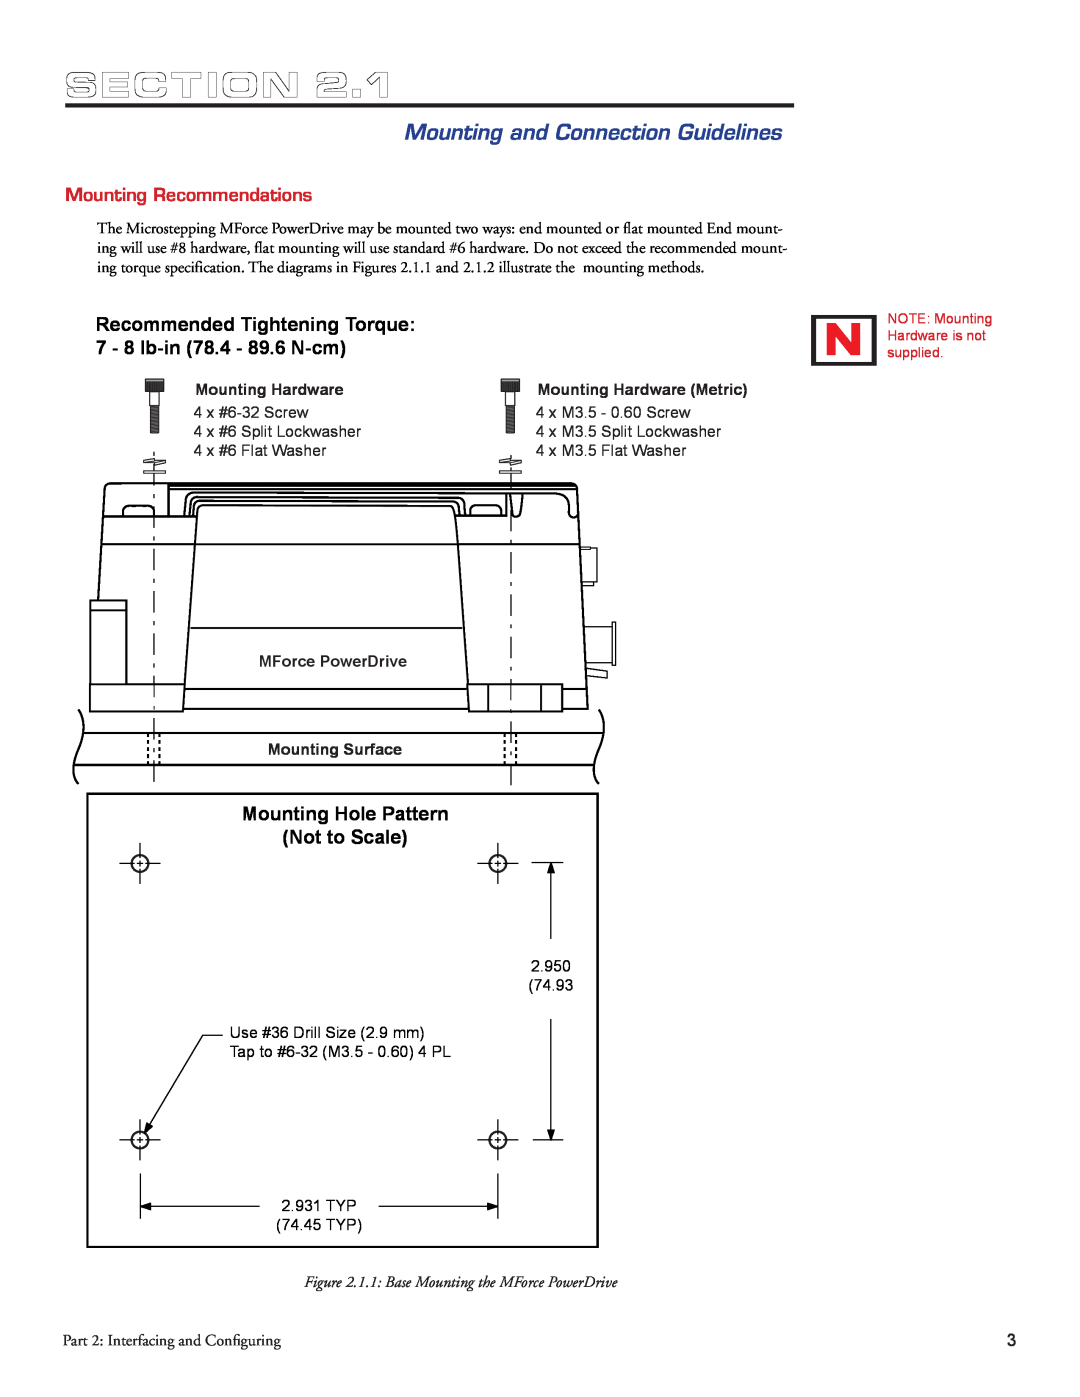 Intelligent Motion Systems Motion Detector Mounting and Connection Guidelines, Section, Mounting Recommendations 